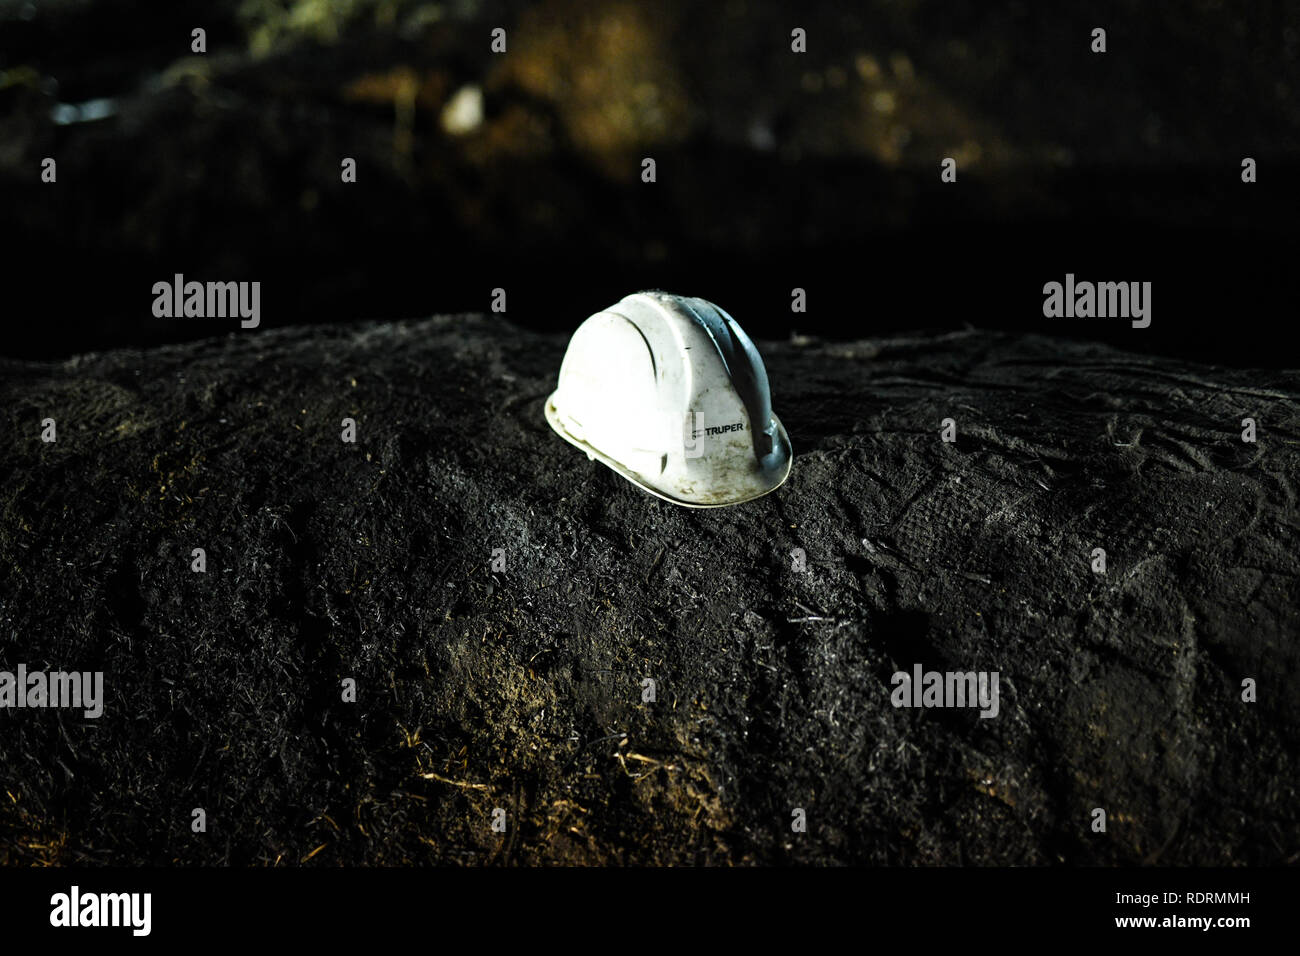 Tlahuelilpan, Mexico. 19th Jan, 2019. A safety helmet is seen at the site of a pipeline explosion in the municipality of Tlahuelilpan, Hidalgo state, Mexico, Jan. 19, 2019. At least 21 people were killed and 71 others injured in a pipeline explosion in the central Mexican state of Hidalgo on Friday, local authorities said. Credit: Xin Yuewei/Xinhua/Alamy Live News Stock Photo